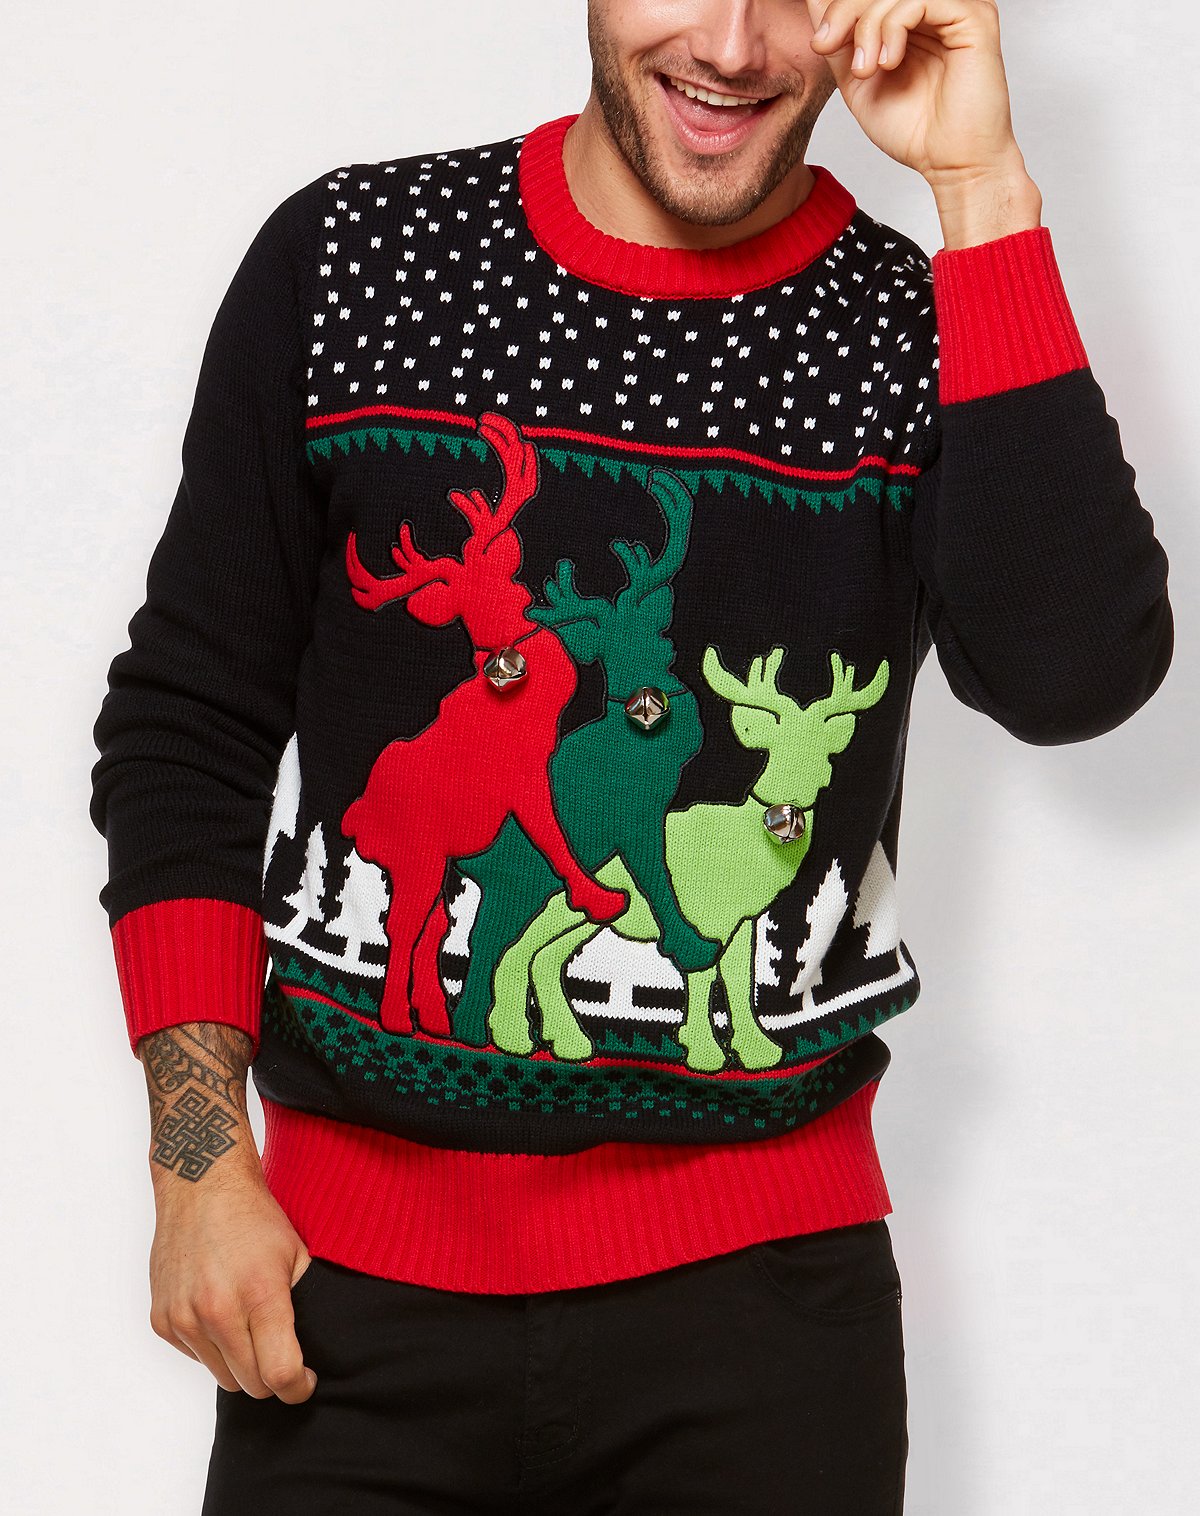 Top 10 Funny Ugly Christmas Sweaters of 2018 – Spencers 